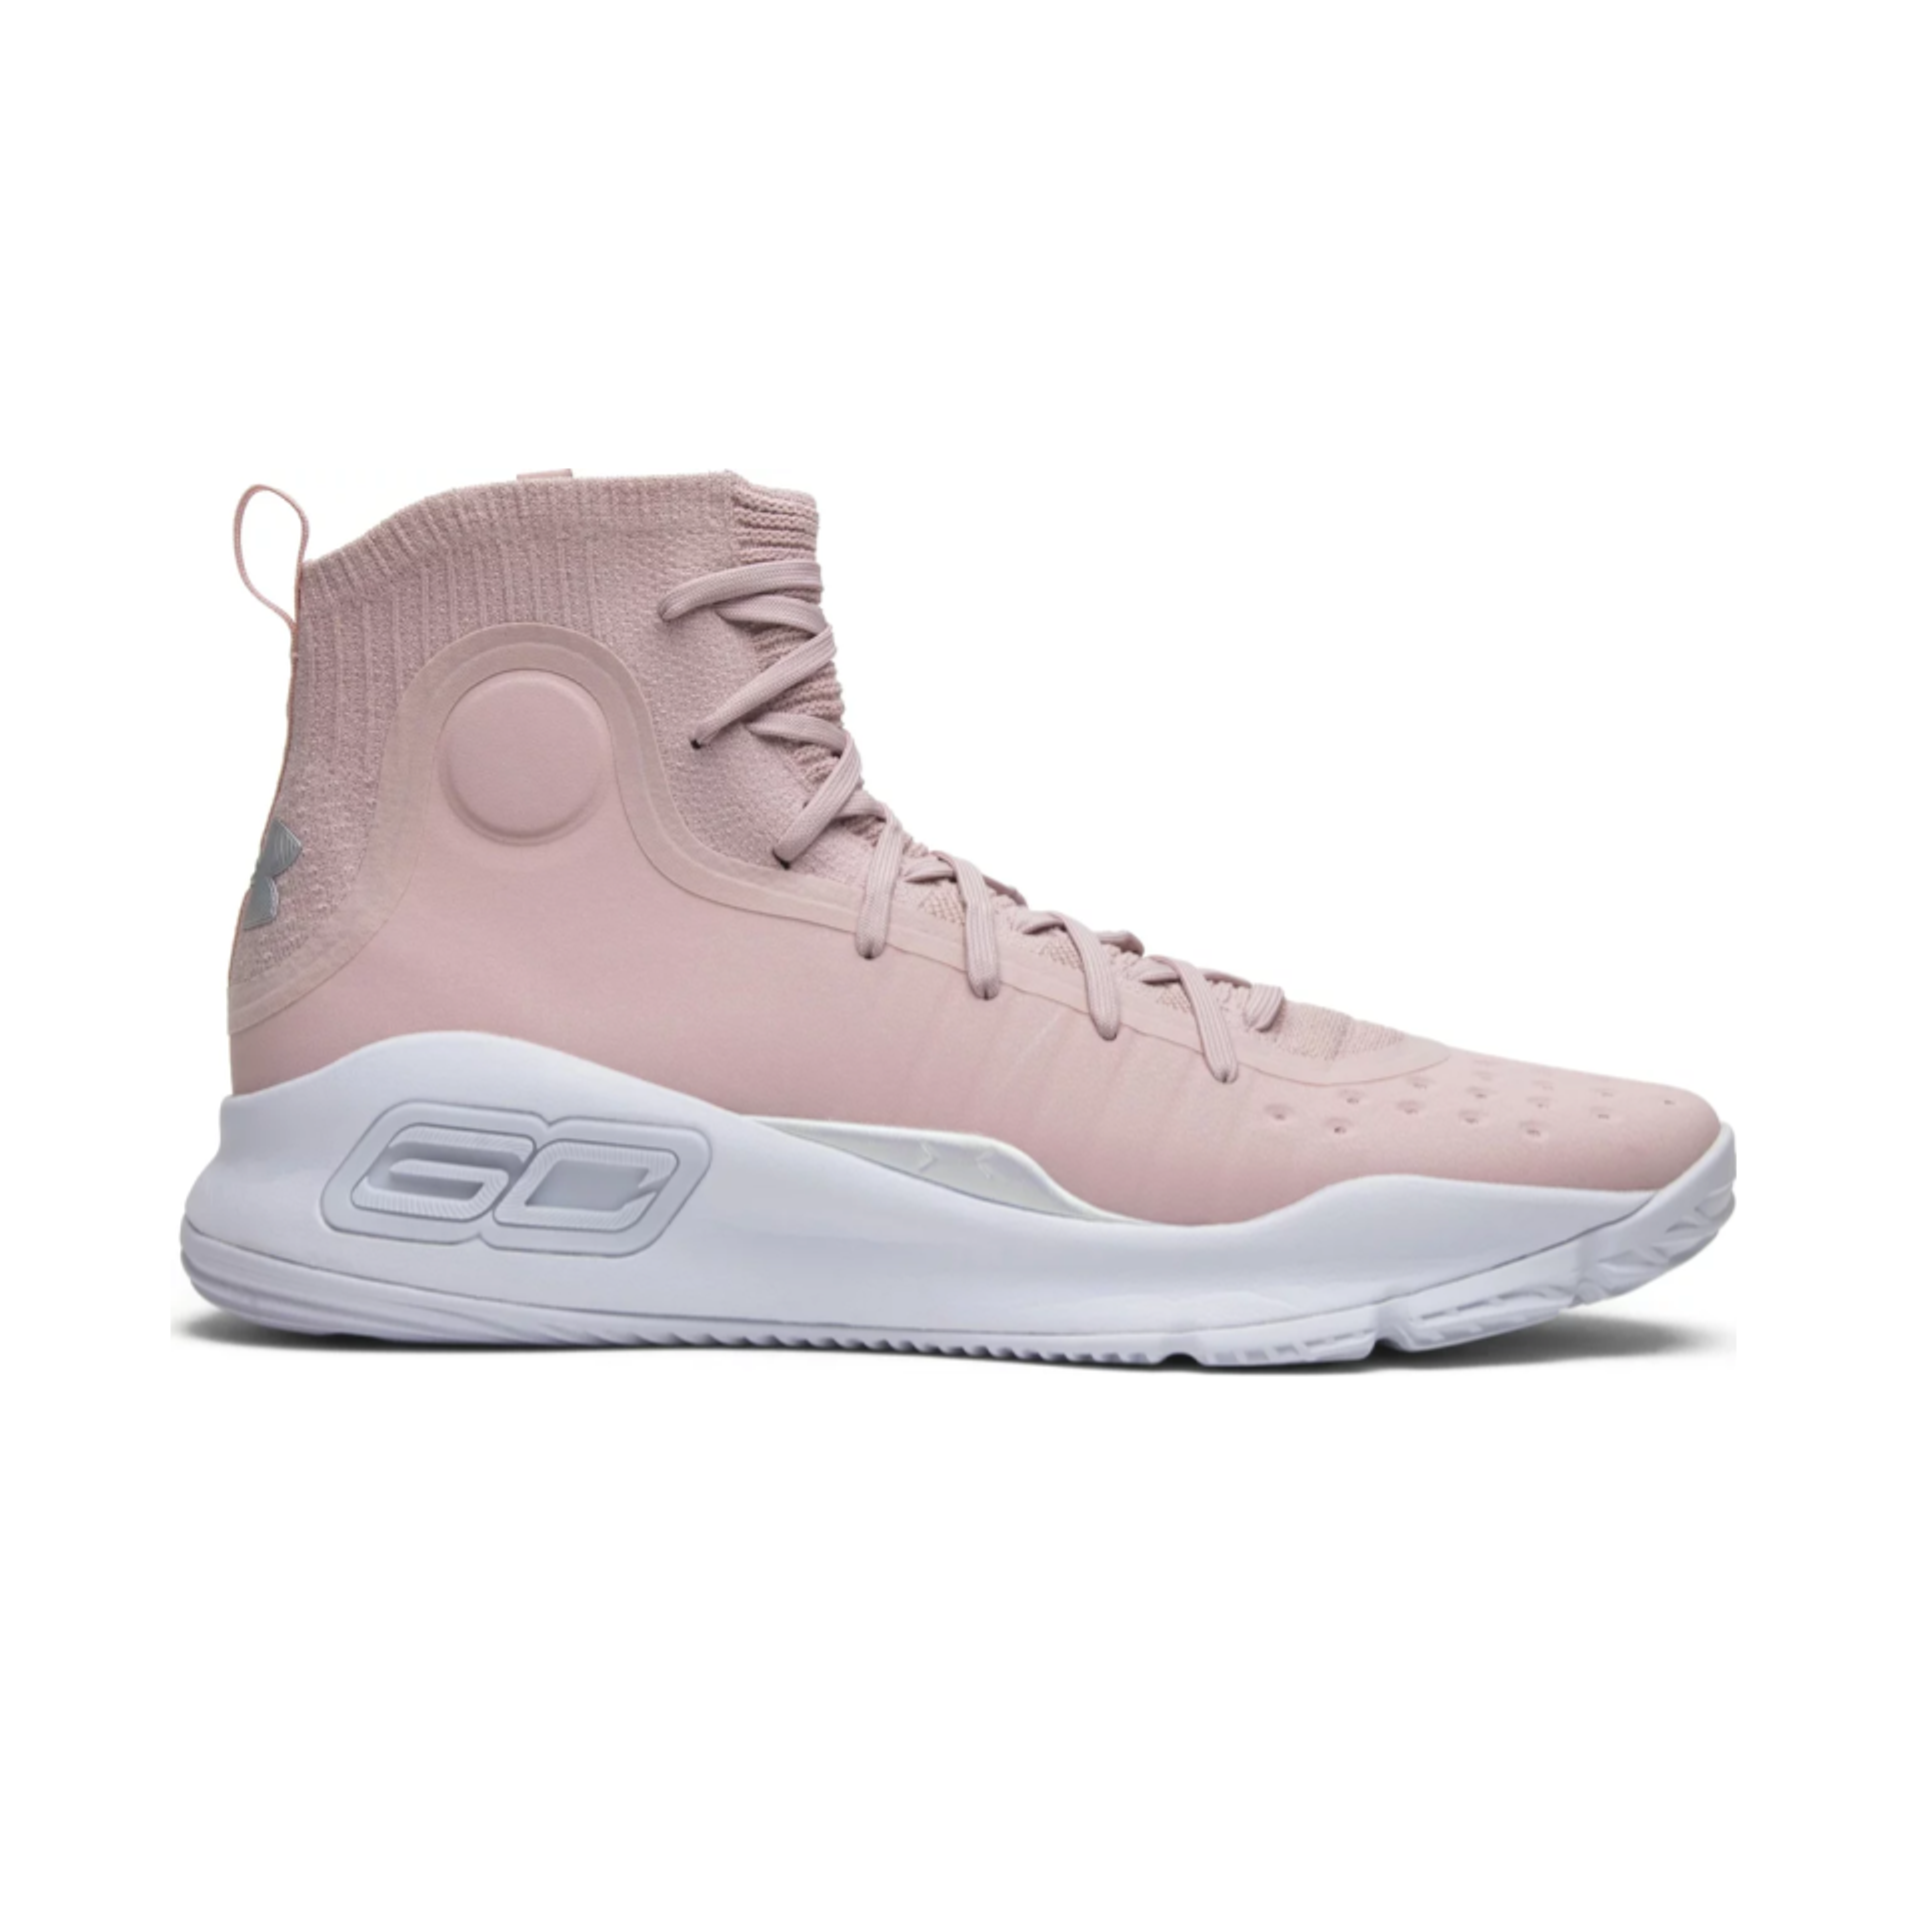 Curry 4 'Flushed Pink'